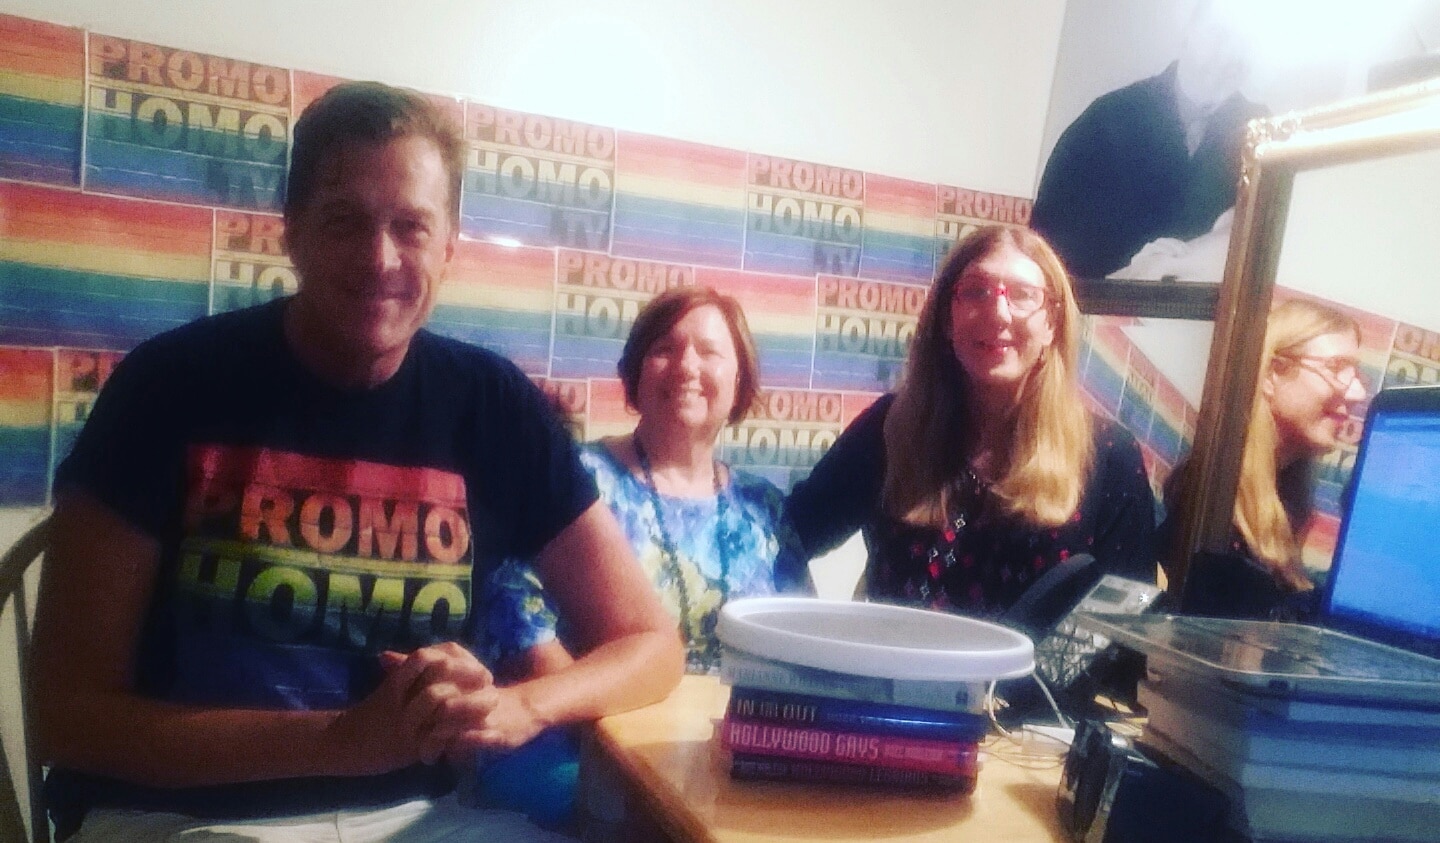 Nicholas Snow with Annie and Laura Meeks in the PromoHomo.TV Studio, August 17, 2016.